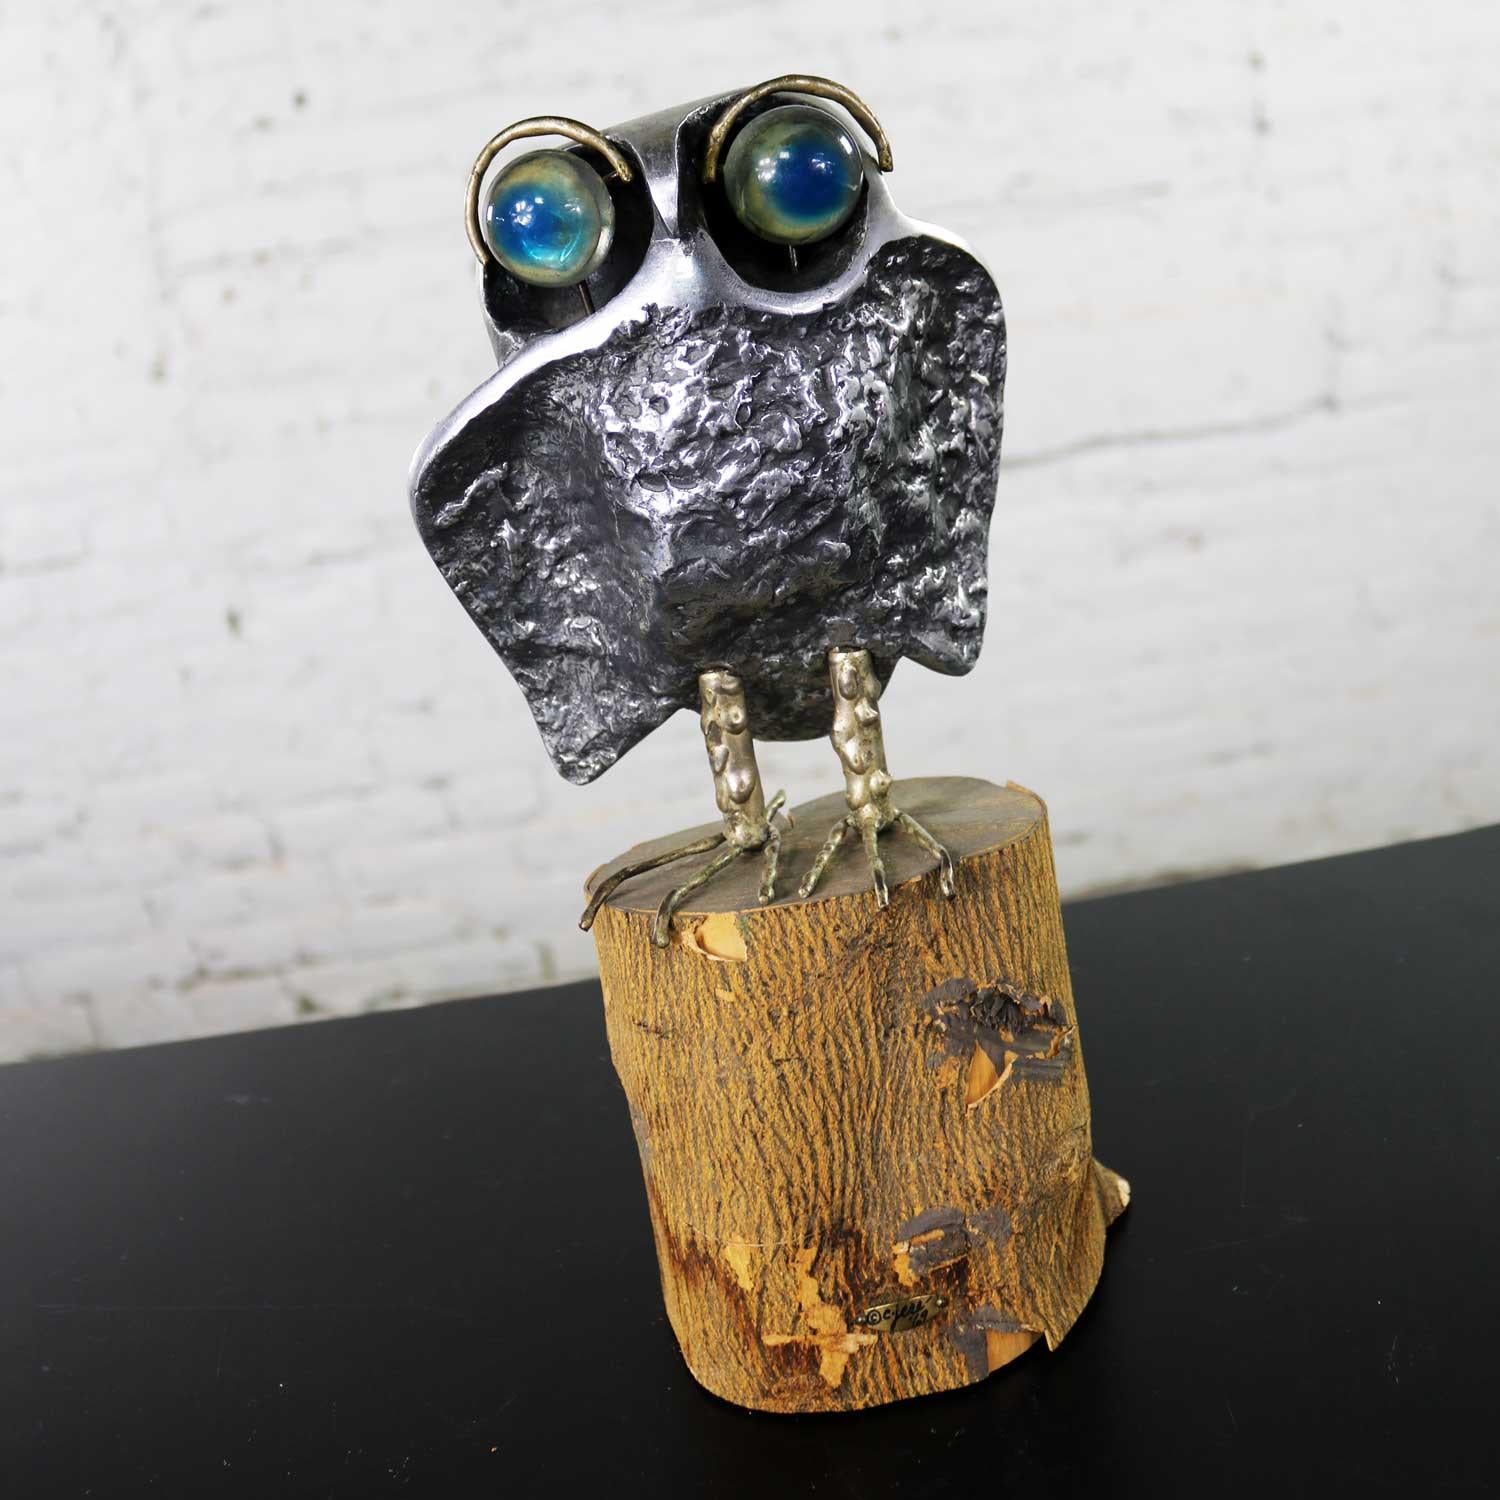 20th Century Mid-Century Modern Owl Sculpture by Curtis Jere in Cast Aluminum on Wood Stump